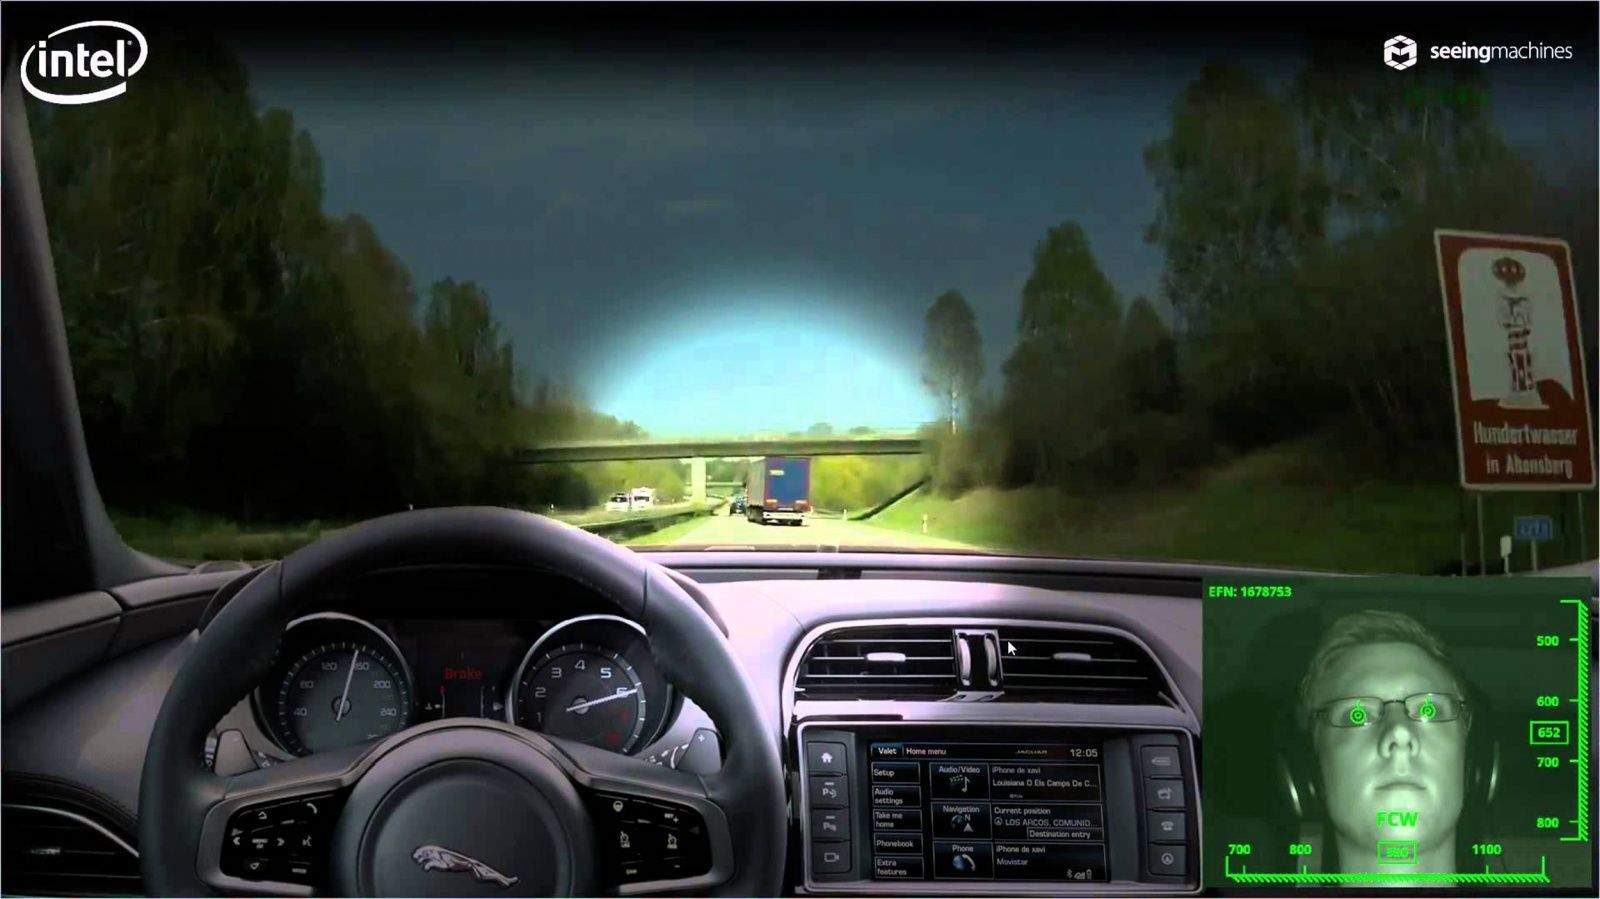 Seeing Machines of Australia has developed in-vehicle cameras that can track blinking and eye gaze and sound an alert if fatigue is distracting a driver's eyes from the road. Photo: Seeing Machines